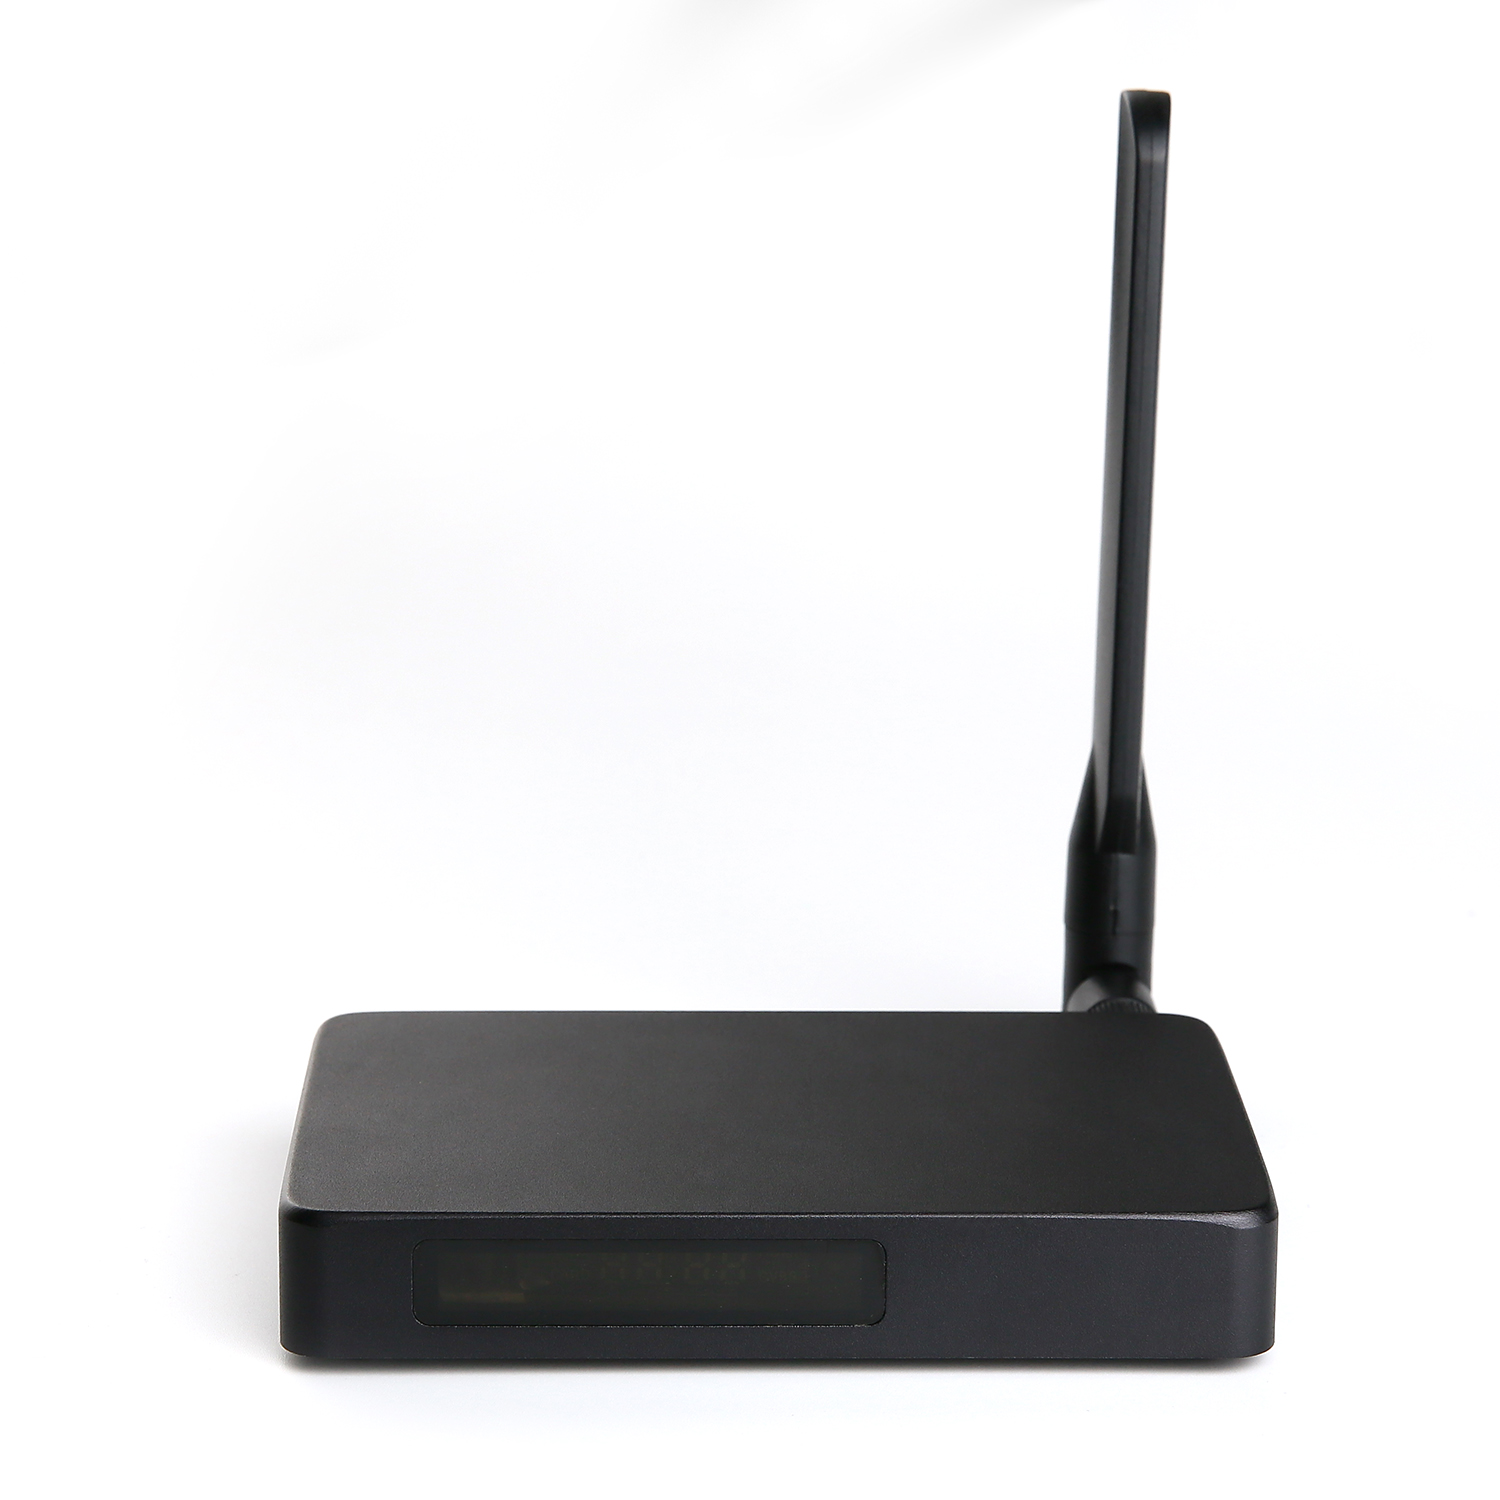 Android Streaming Box HDMI Input, PVR Media Player with HDMI input